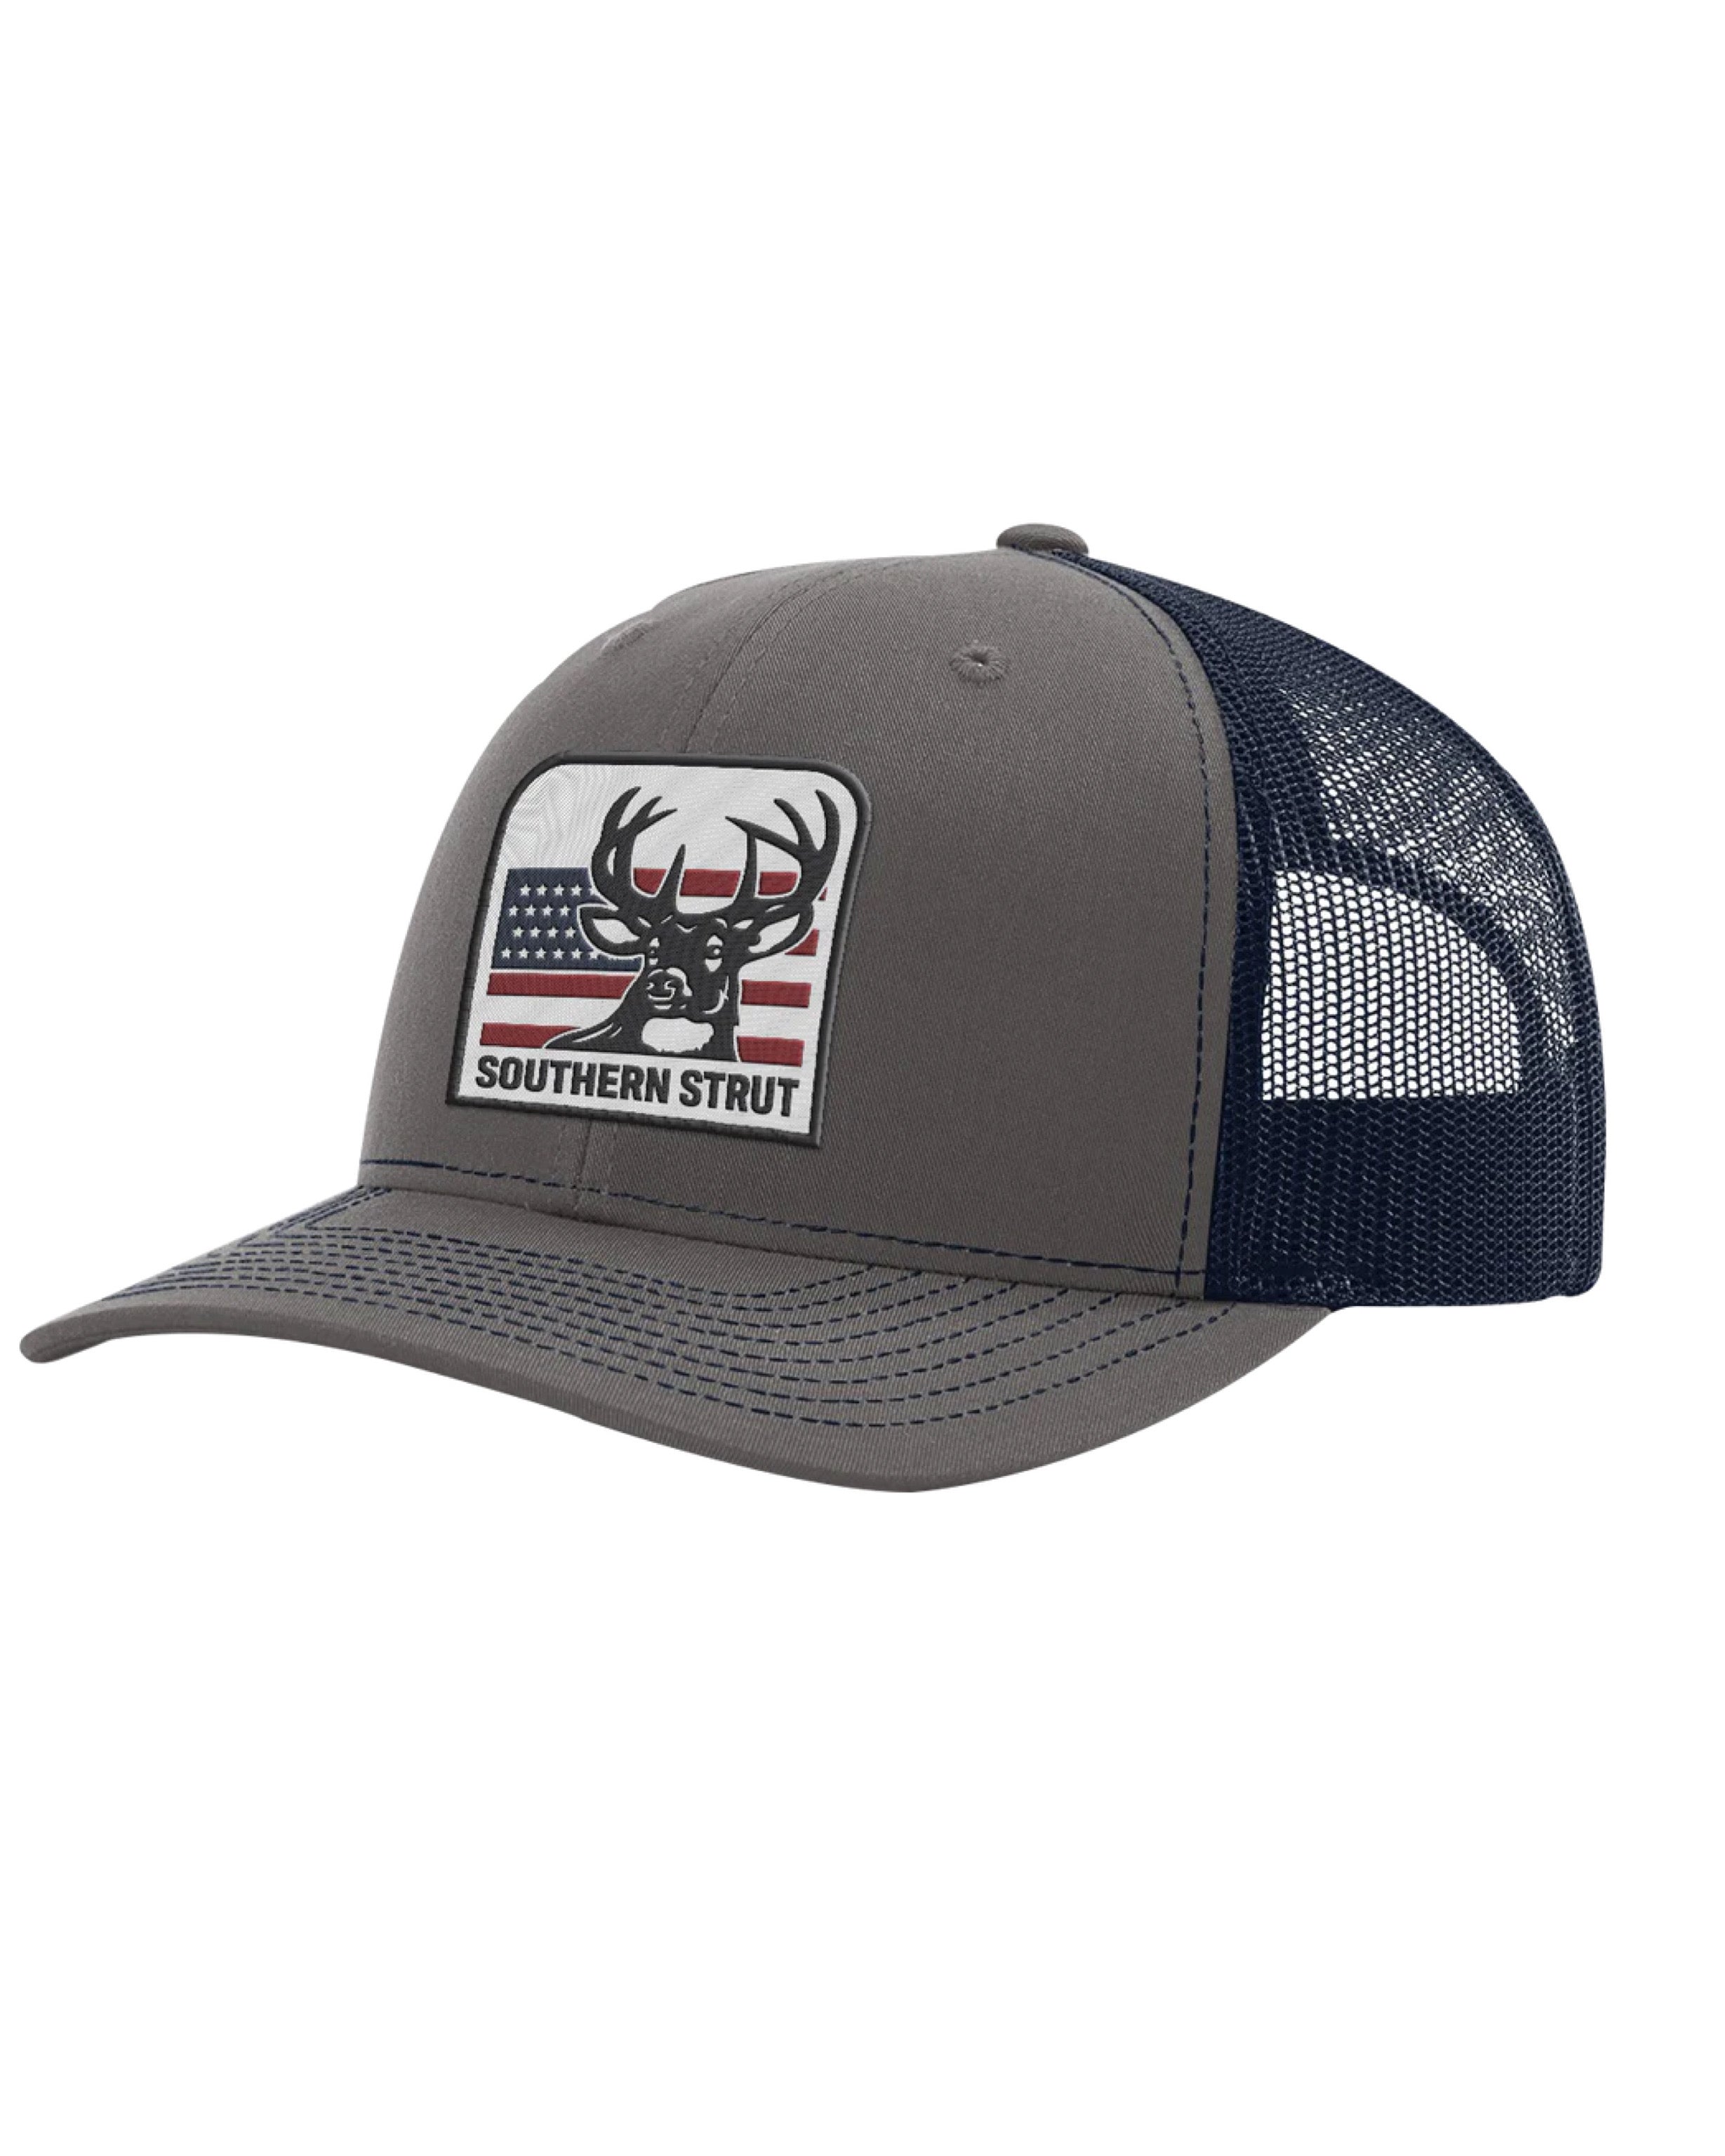 American Deer Woven Patch Hat by Southern Strut